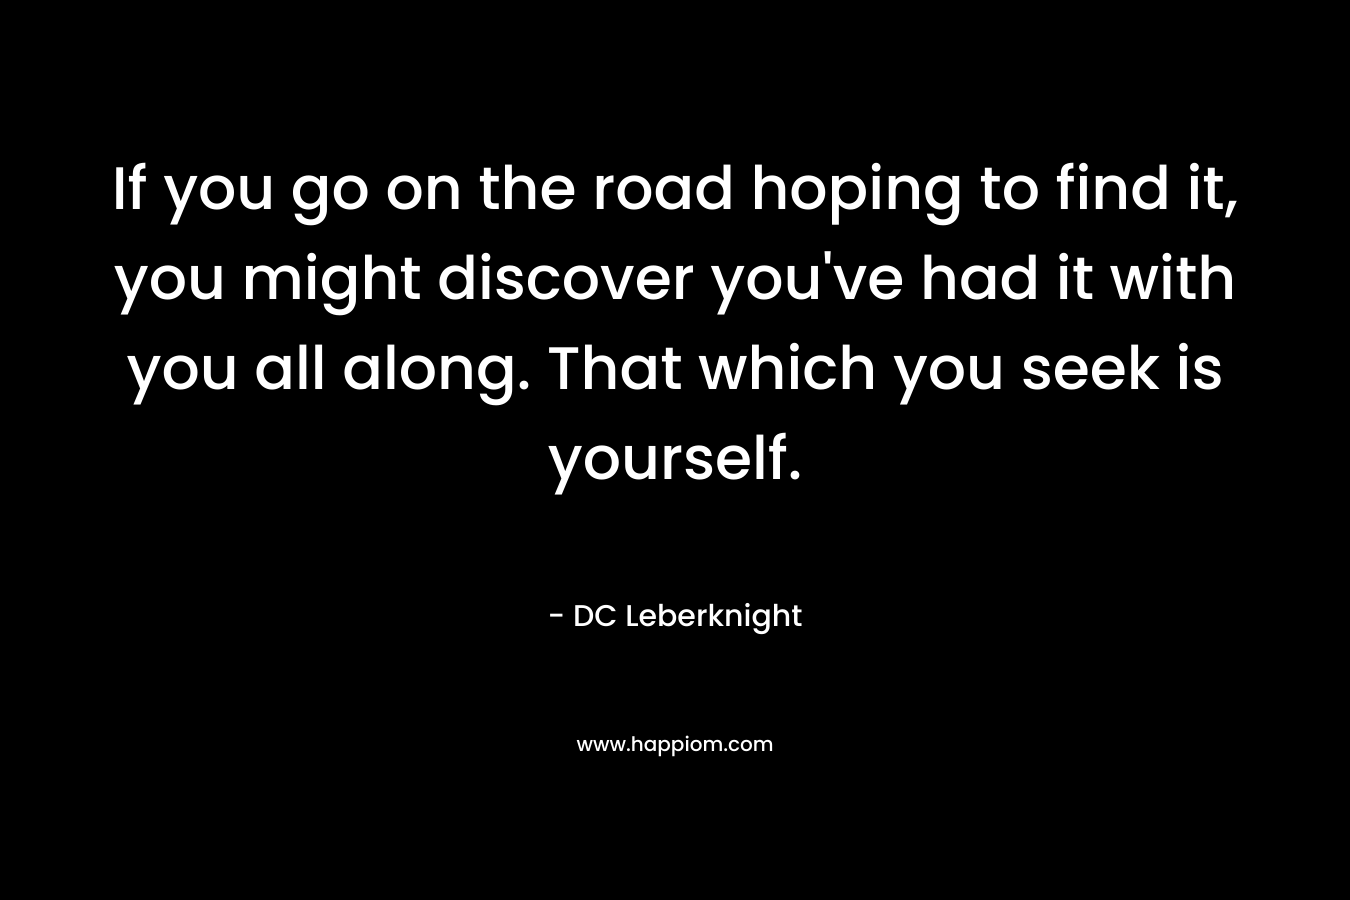 If you go on the road hoping to find it, you might discover you’ve had it with you all along. That which you seek is yourself. – DC Leberknight